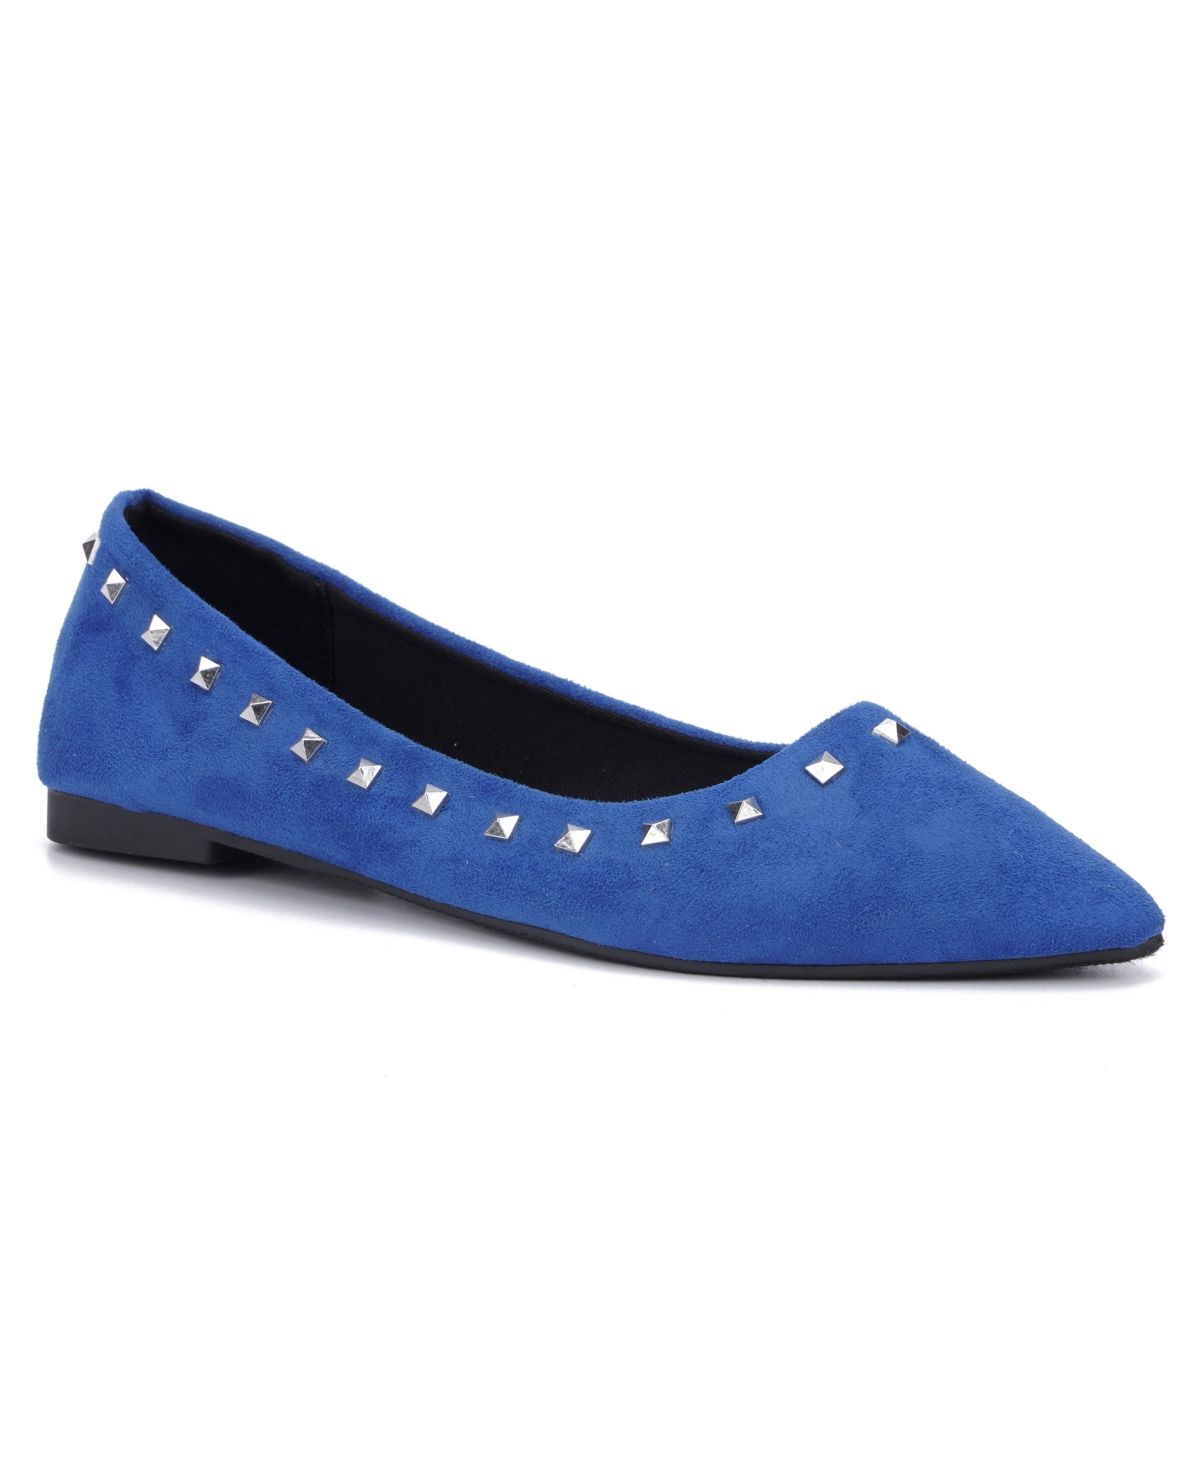 NY&Co. Harper Studded Flat Blue – For the Working Lady